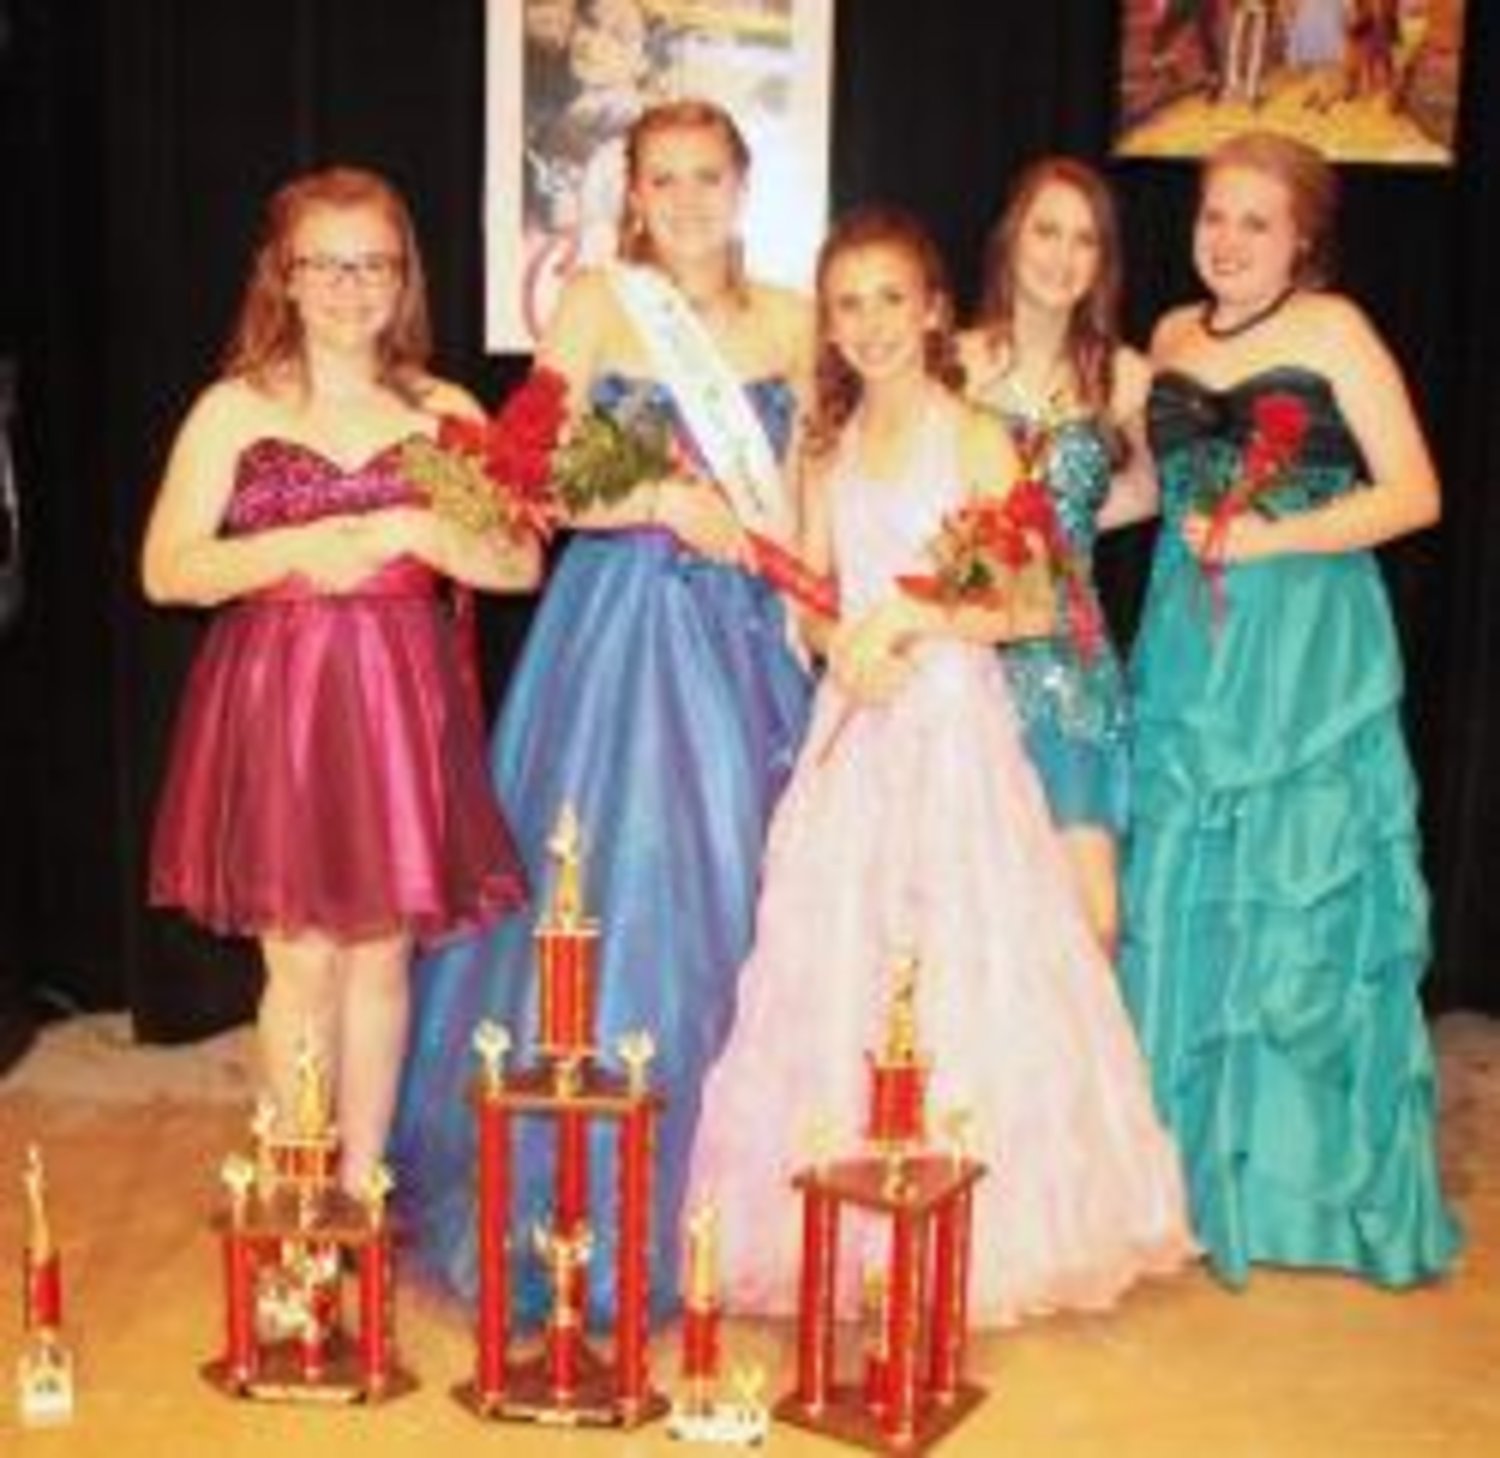 The Junior Miss Dogwood contestants gather for a photo. From left to right: Second runner-up Halee Hightower, Junior Miss Dogwood Haven Hardy, first runner-up Emma VanBecelaere, Aleigh Farnham and Maddy Whitehurst.